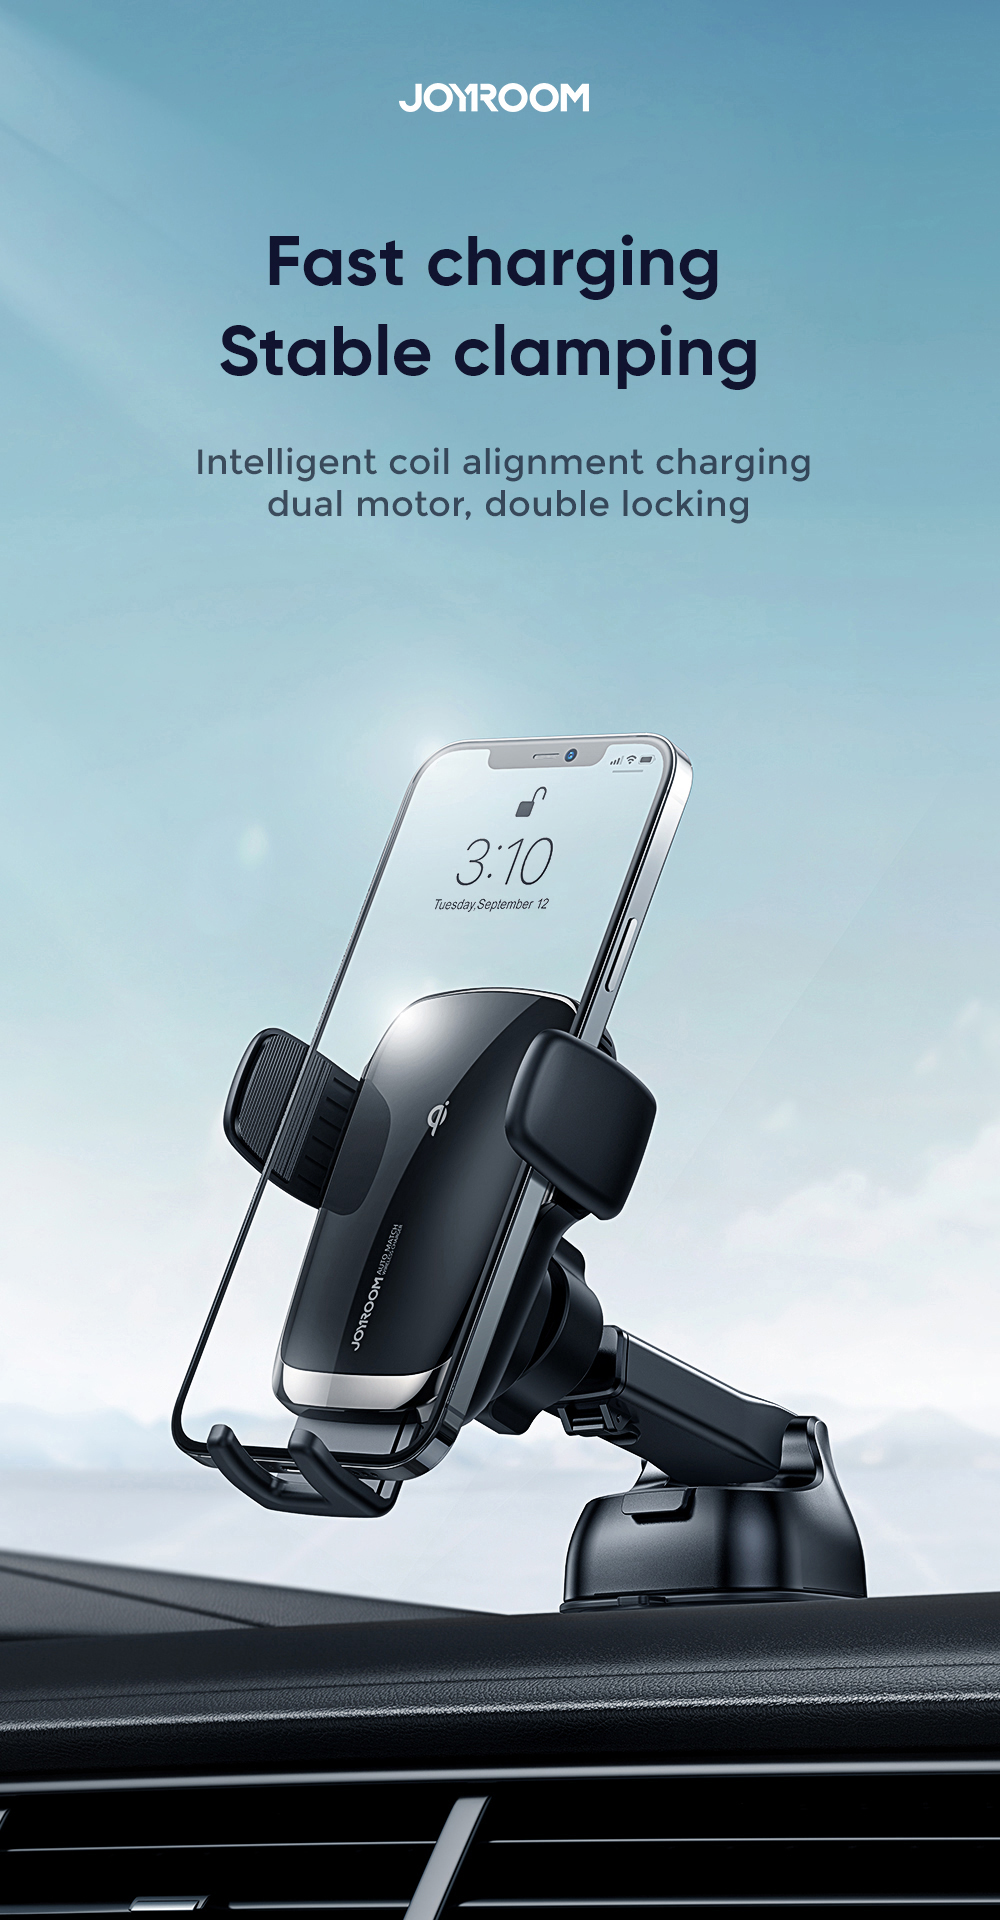 joyroom-JR-ZS248-15W-Qi-Intelligent-Accurate-Alignment-Charging-Car-Mount-for-Air-Vent-Mount--Dashbo-1793581-3